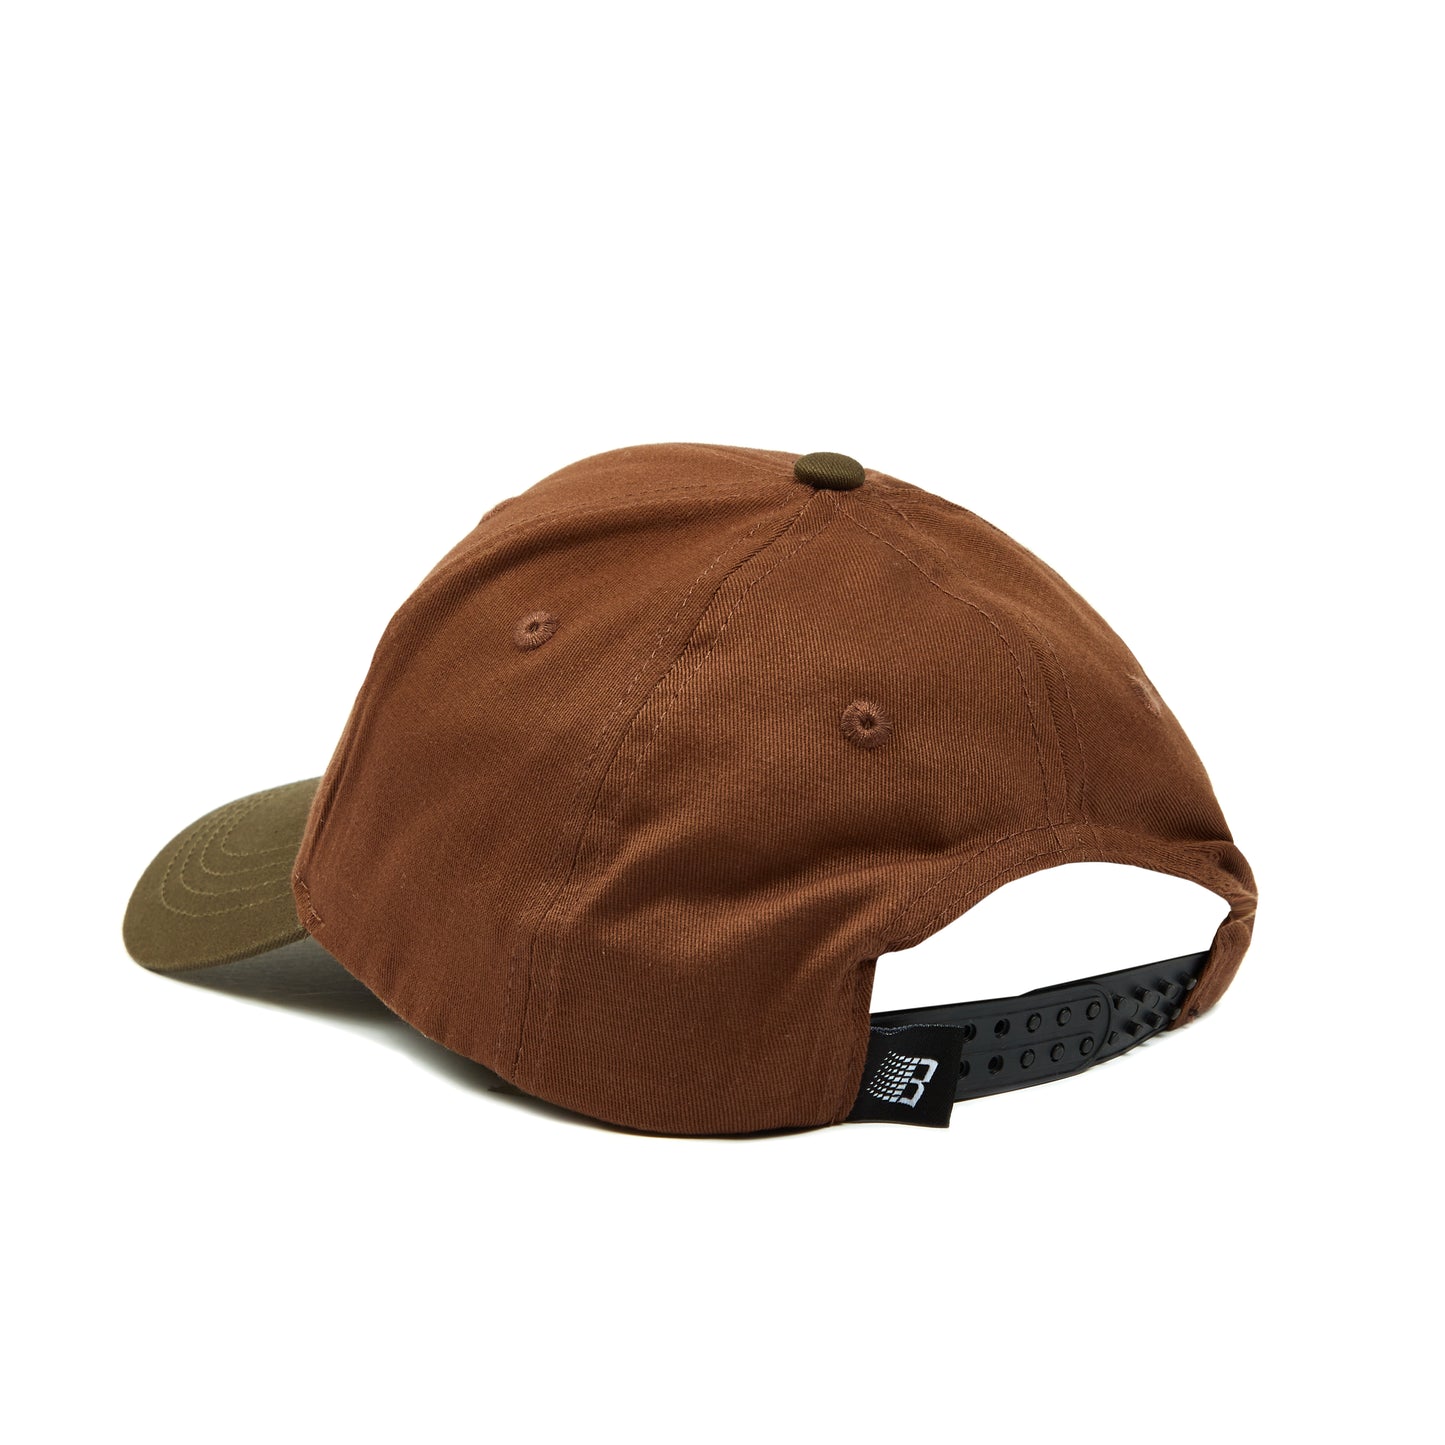 XLB HAT CHOCOLATE/FOREST GREEN